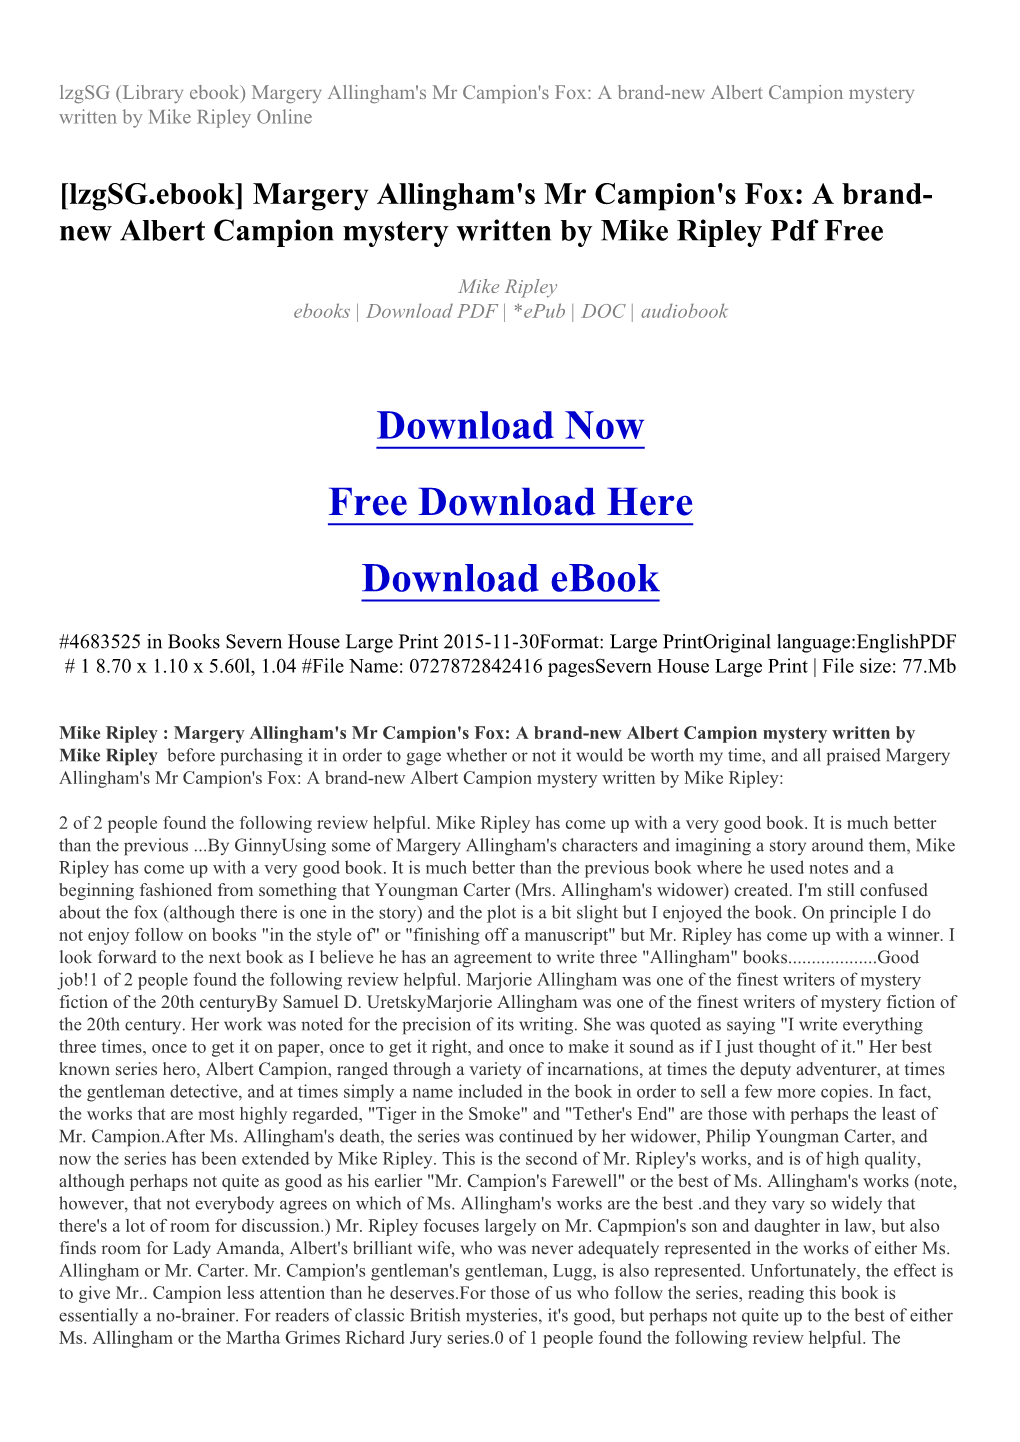 A Brand-New Albert Campion Mystery Written by Mike Ripley Online